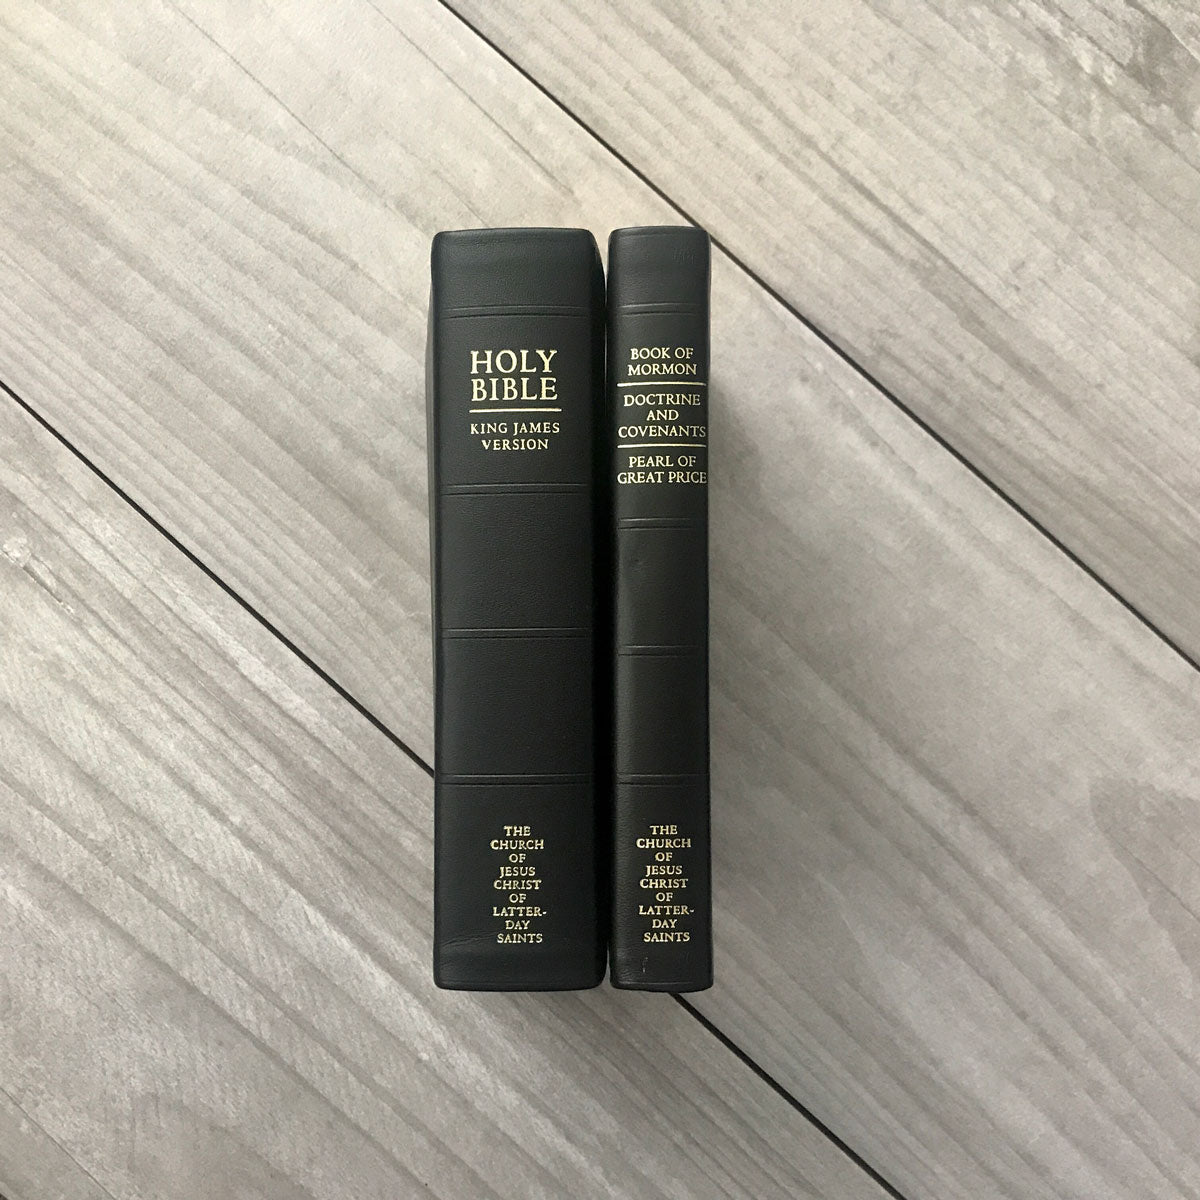 LDS Triple combination and bible available for customization